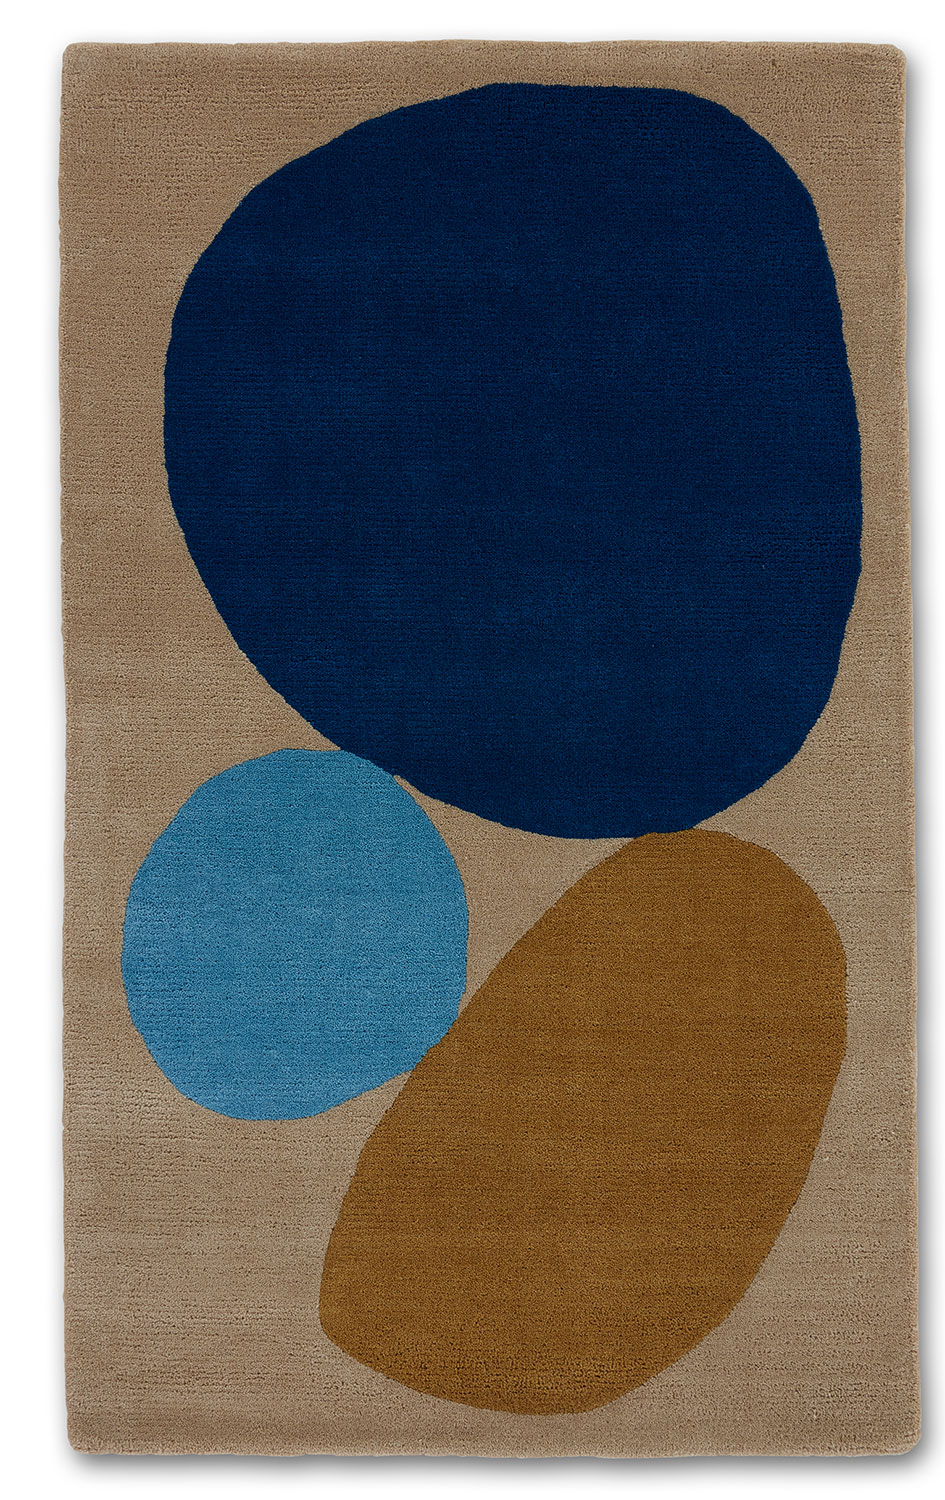 A 3 foot by 5 foot modern rug called Three Stones Sand